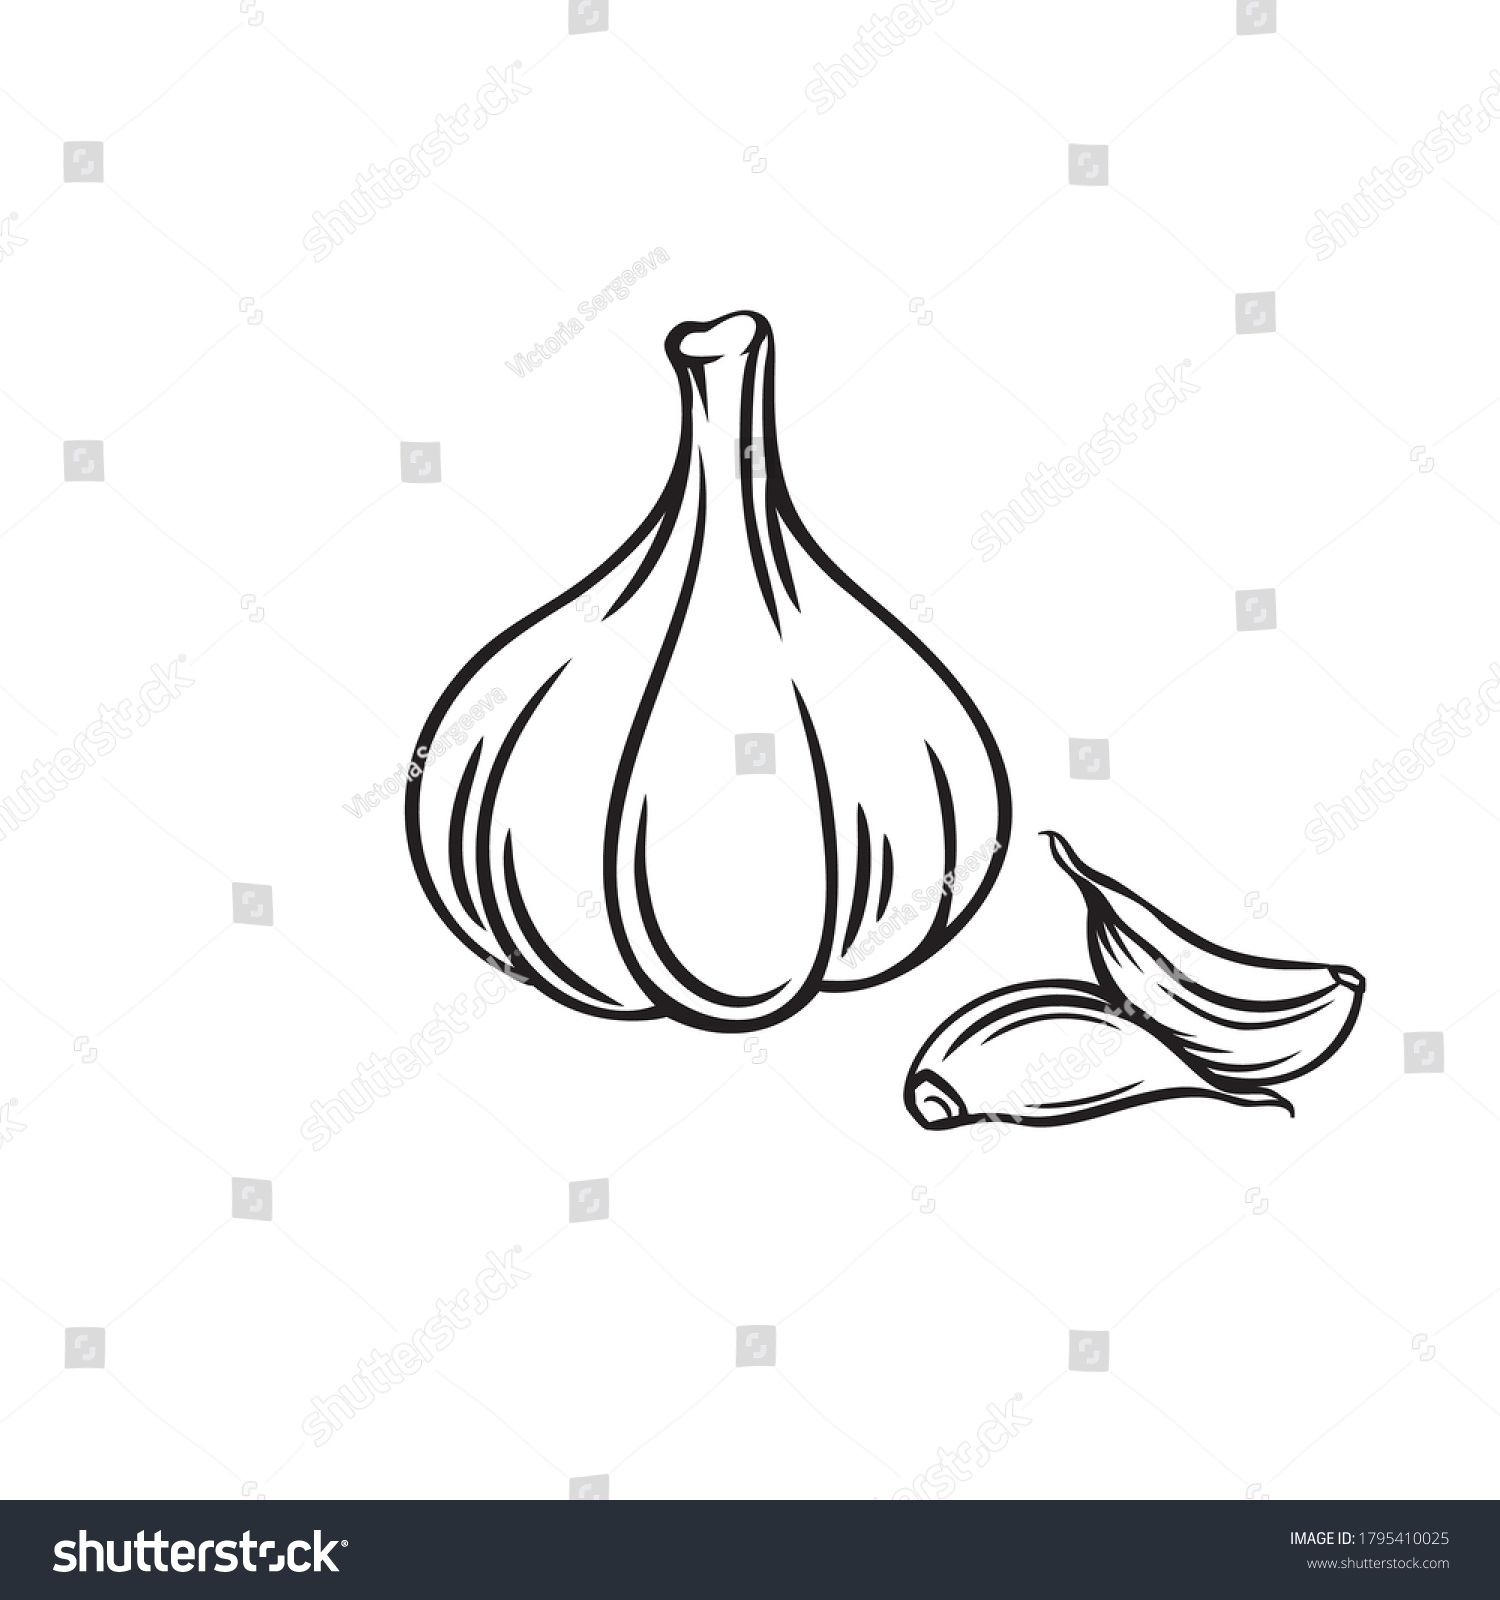 Garlic outline vector illustration. Farm market product, isolated vegetable, engraved bunch of garlic. #1795410025